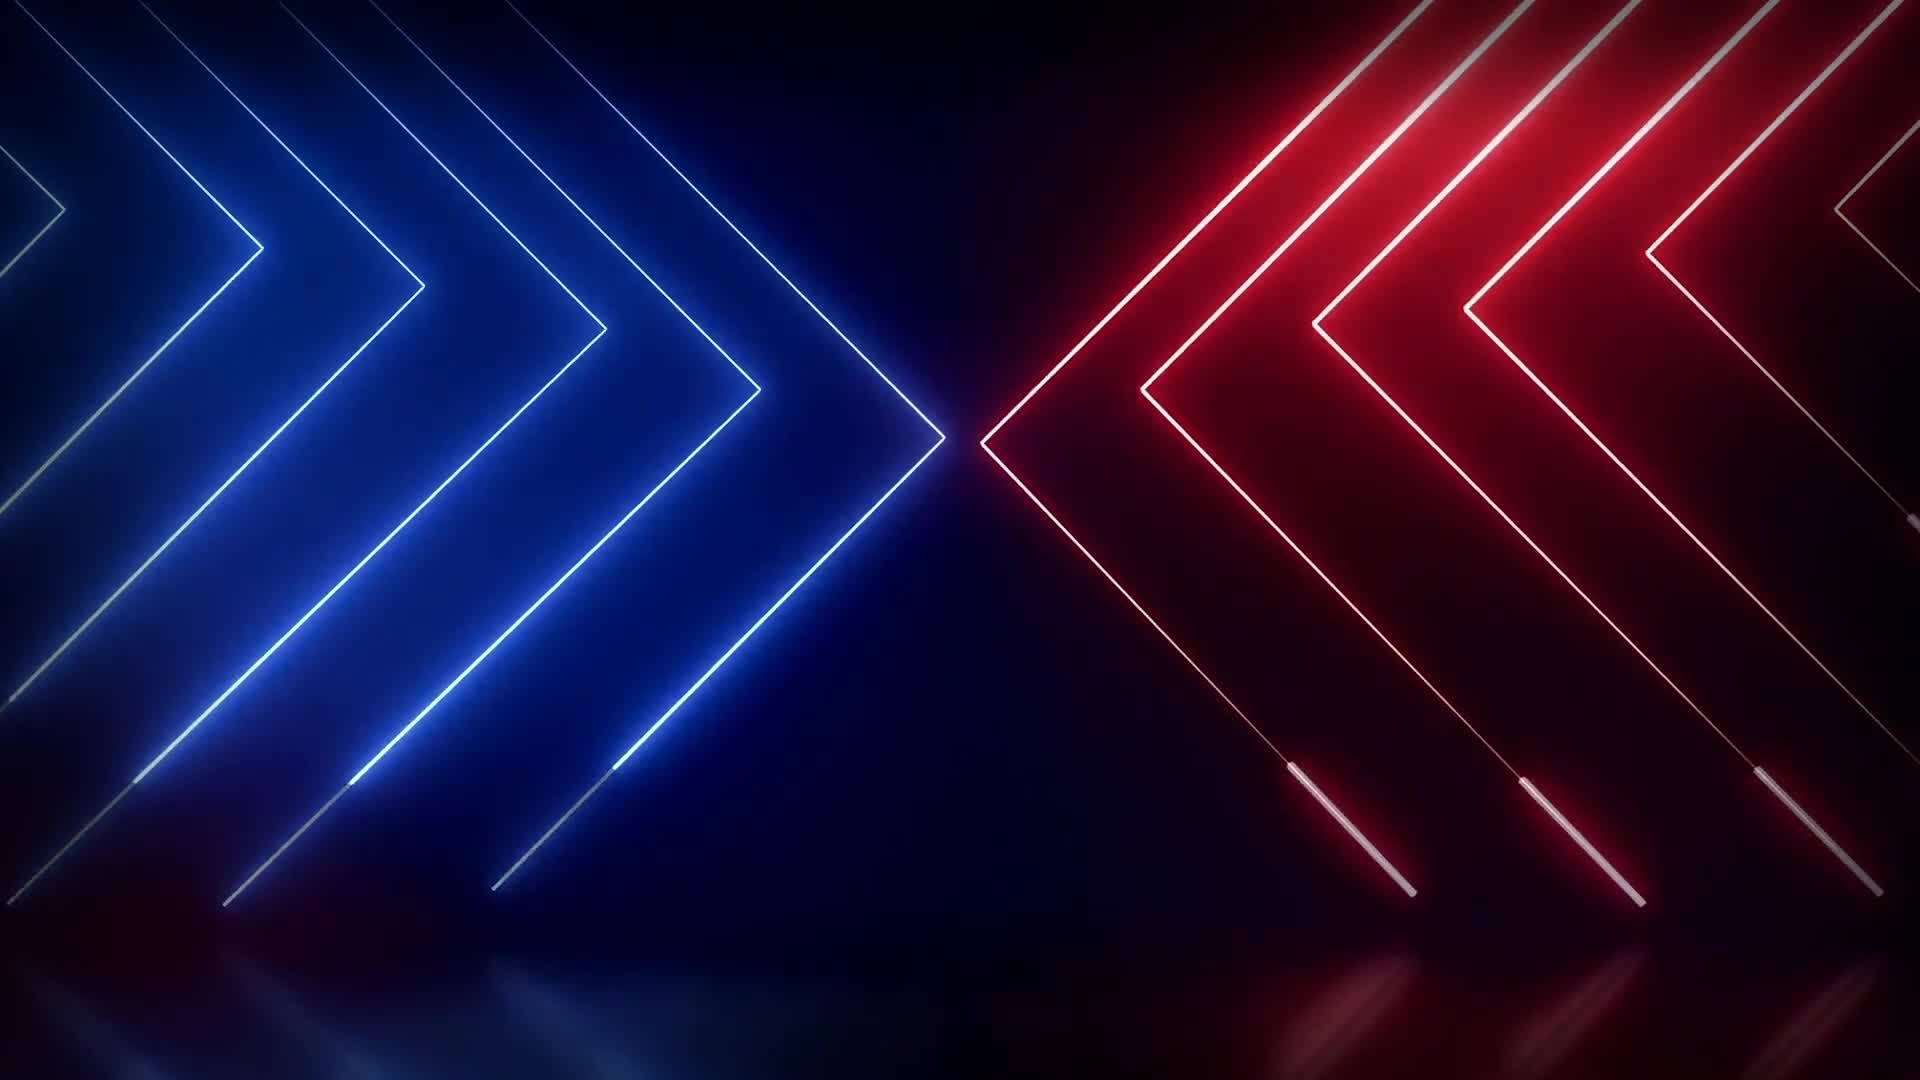 Vibrant Red And Blue Neon Triangle Lights. Background